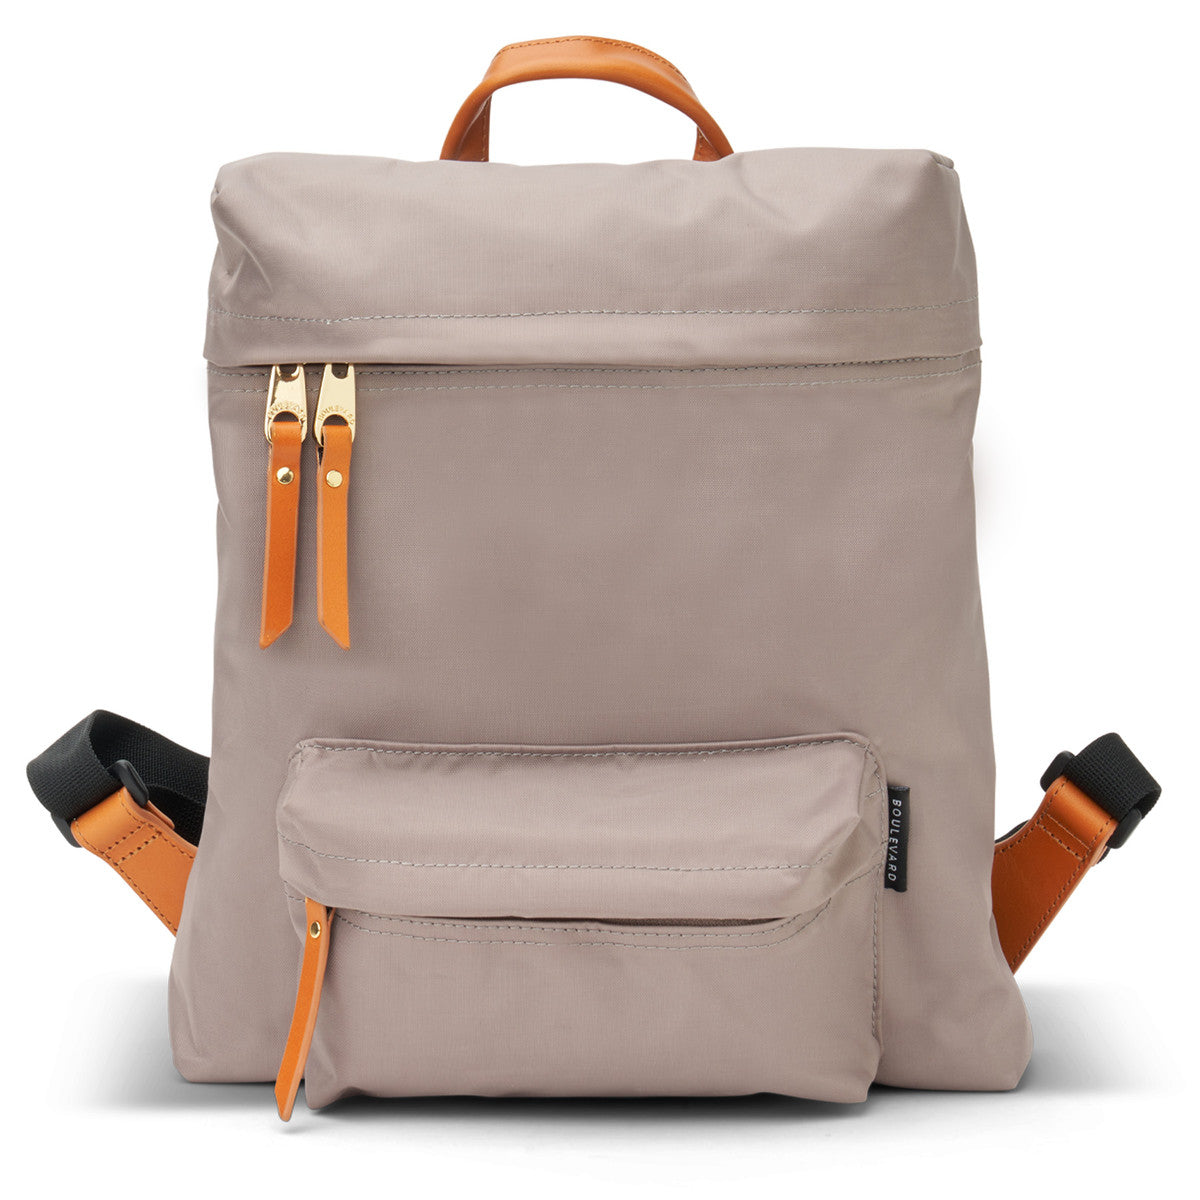 Hailey Backpack - Taupe (Ships in 1-2 Weeks)